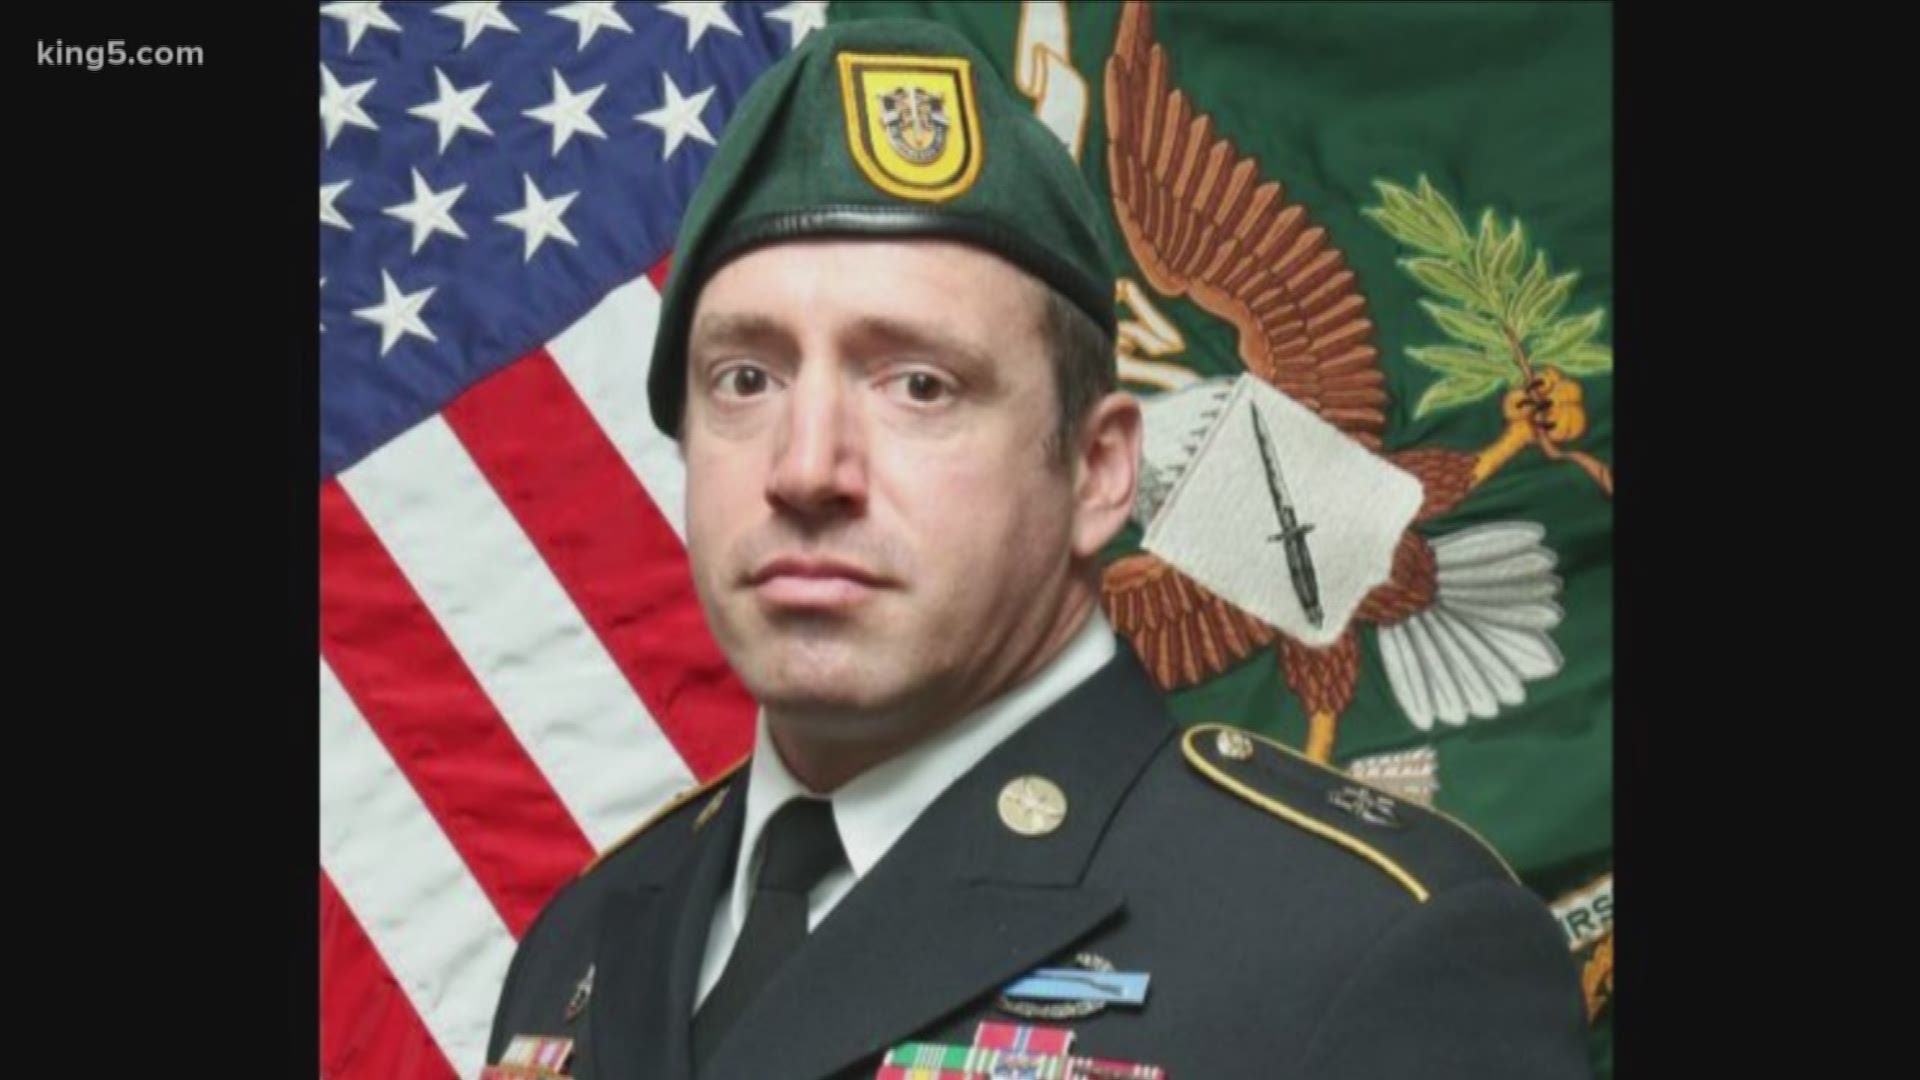 Army Sgt. 1st Class Jeremy W. Griffin was a Green Beret stationed at Joint Base Lewis-McCord, but was originally from Tennessee.  The Department of Defense says he was killed by small arms fire on September 16th.